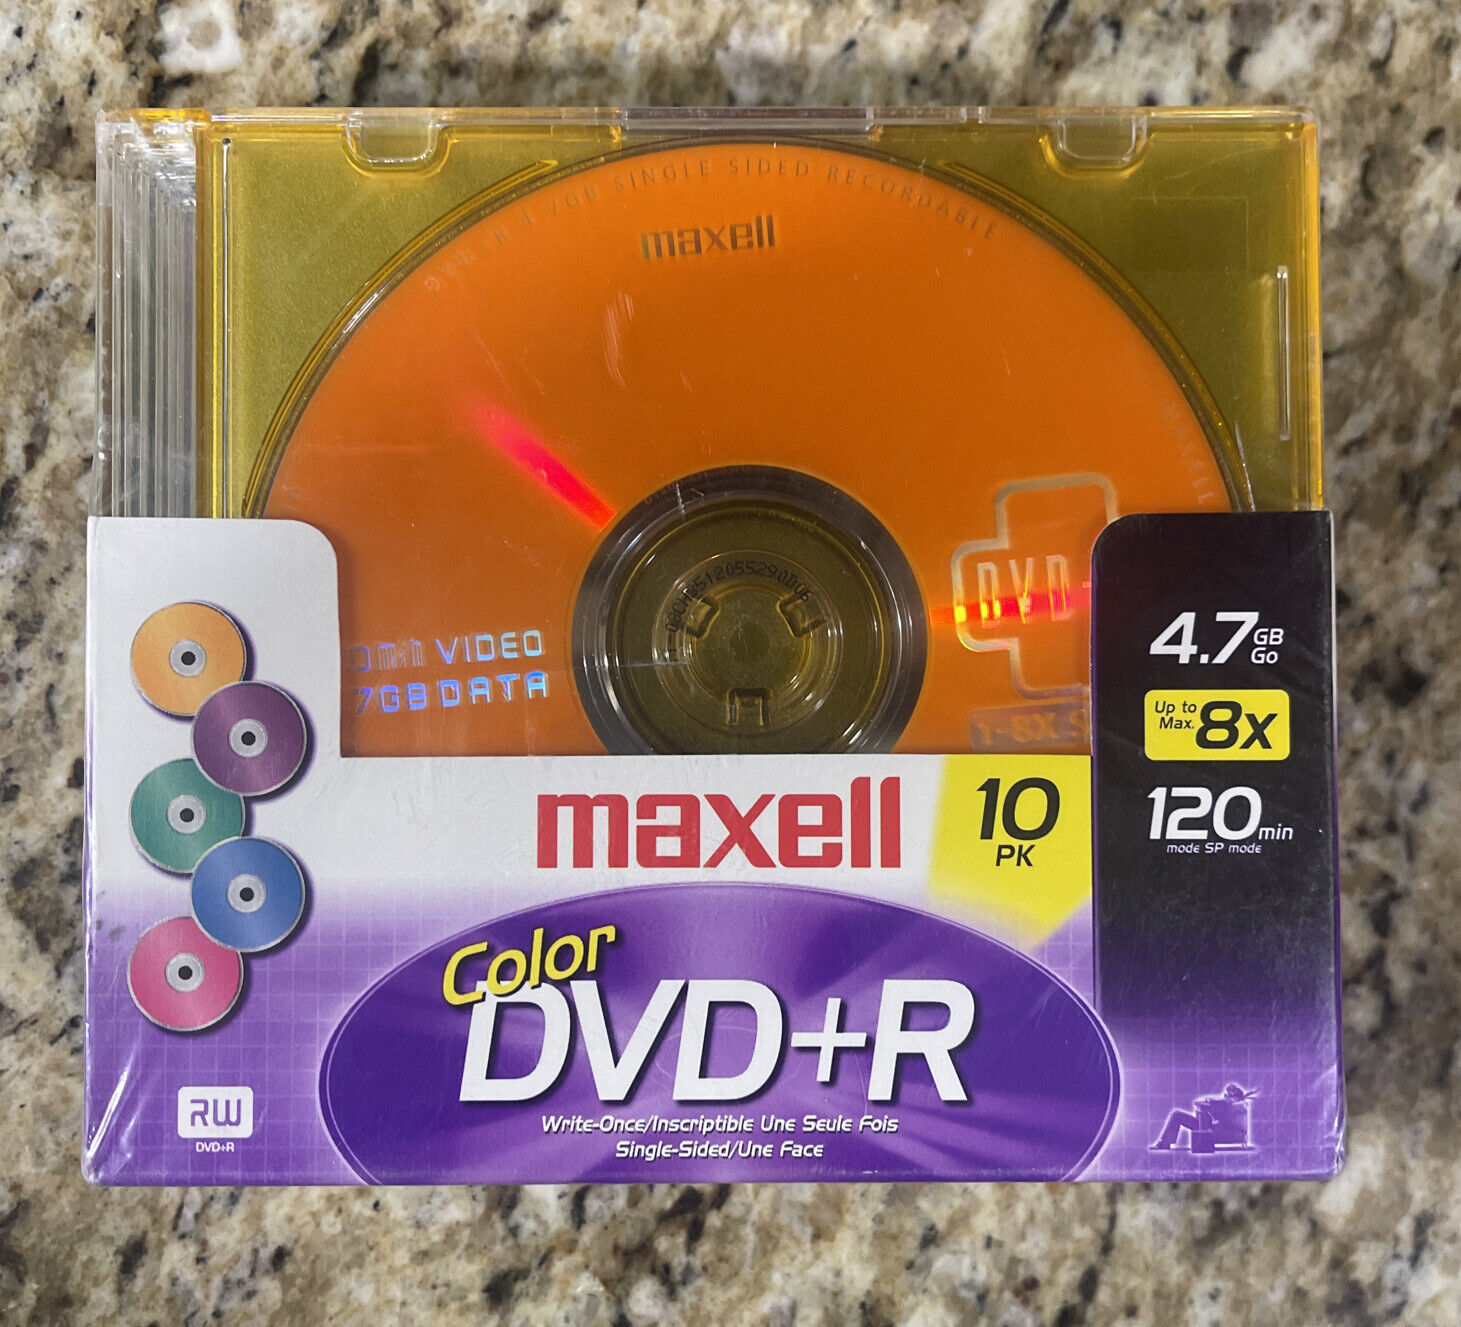 FACTORY SEALED Maxell Color DVD-R 10 Pack w/ Jewel Cases 4.7GB 120Min 16X NEW